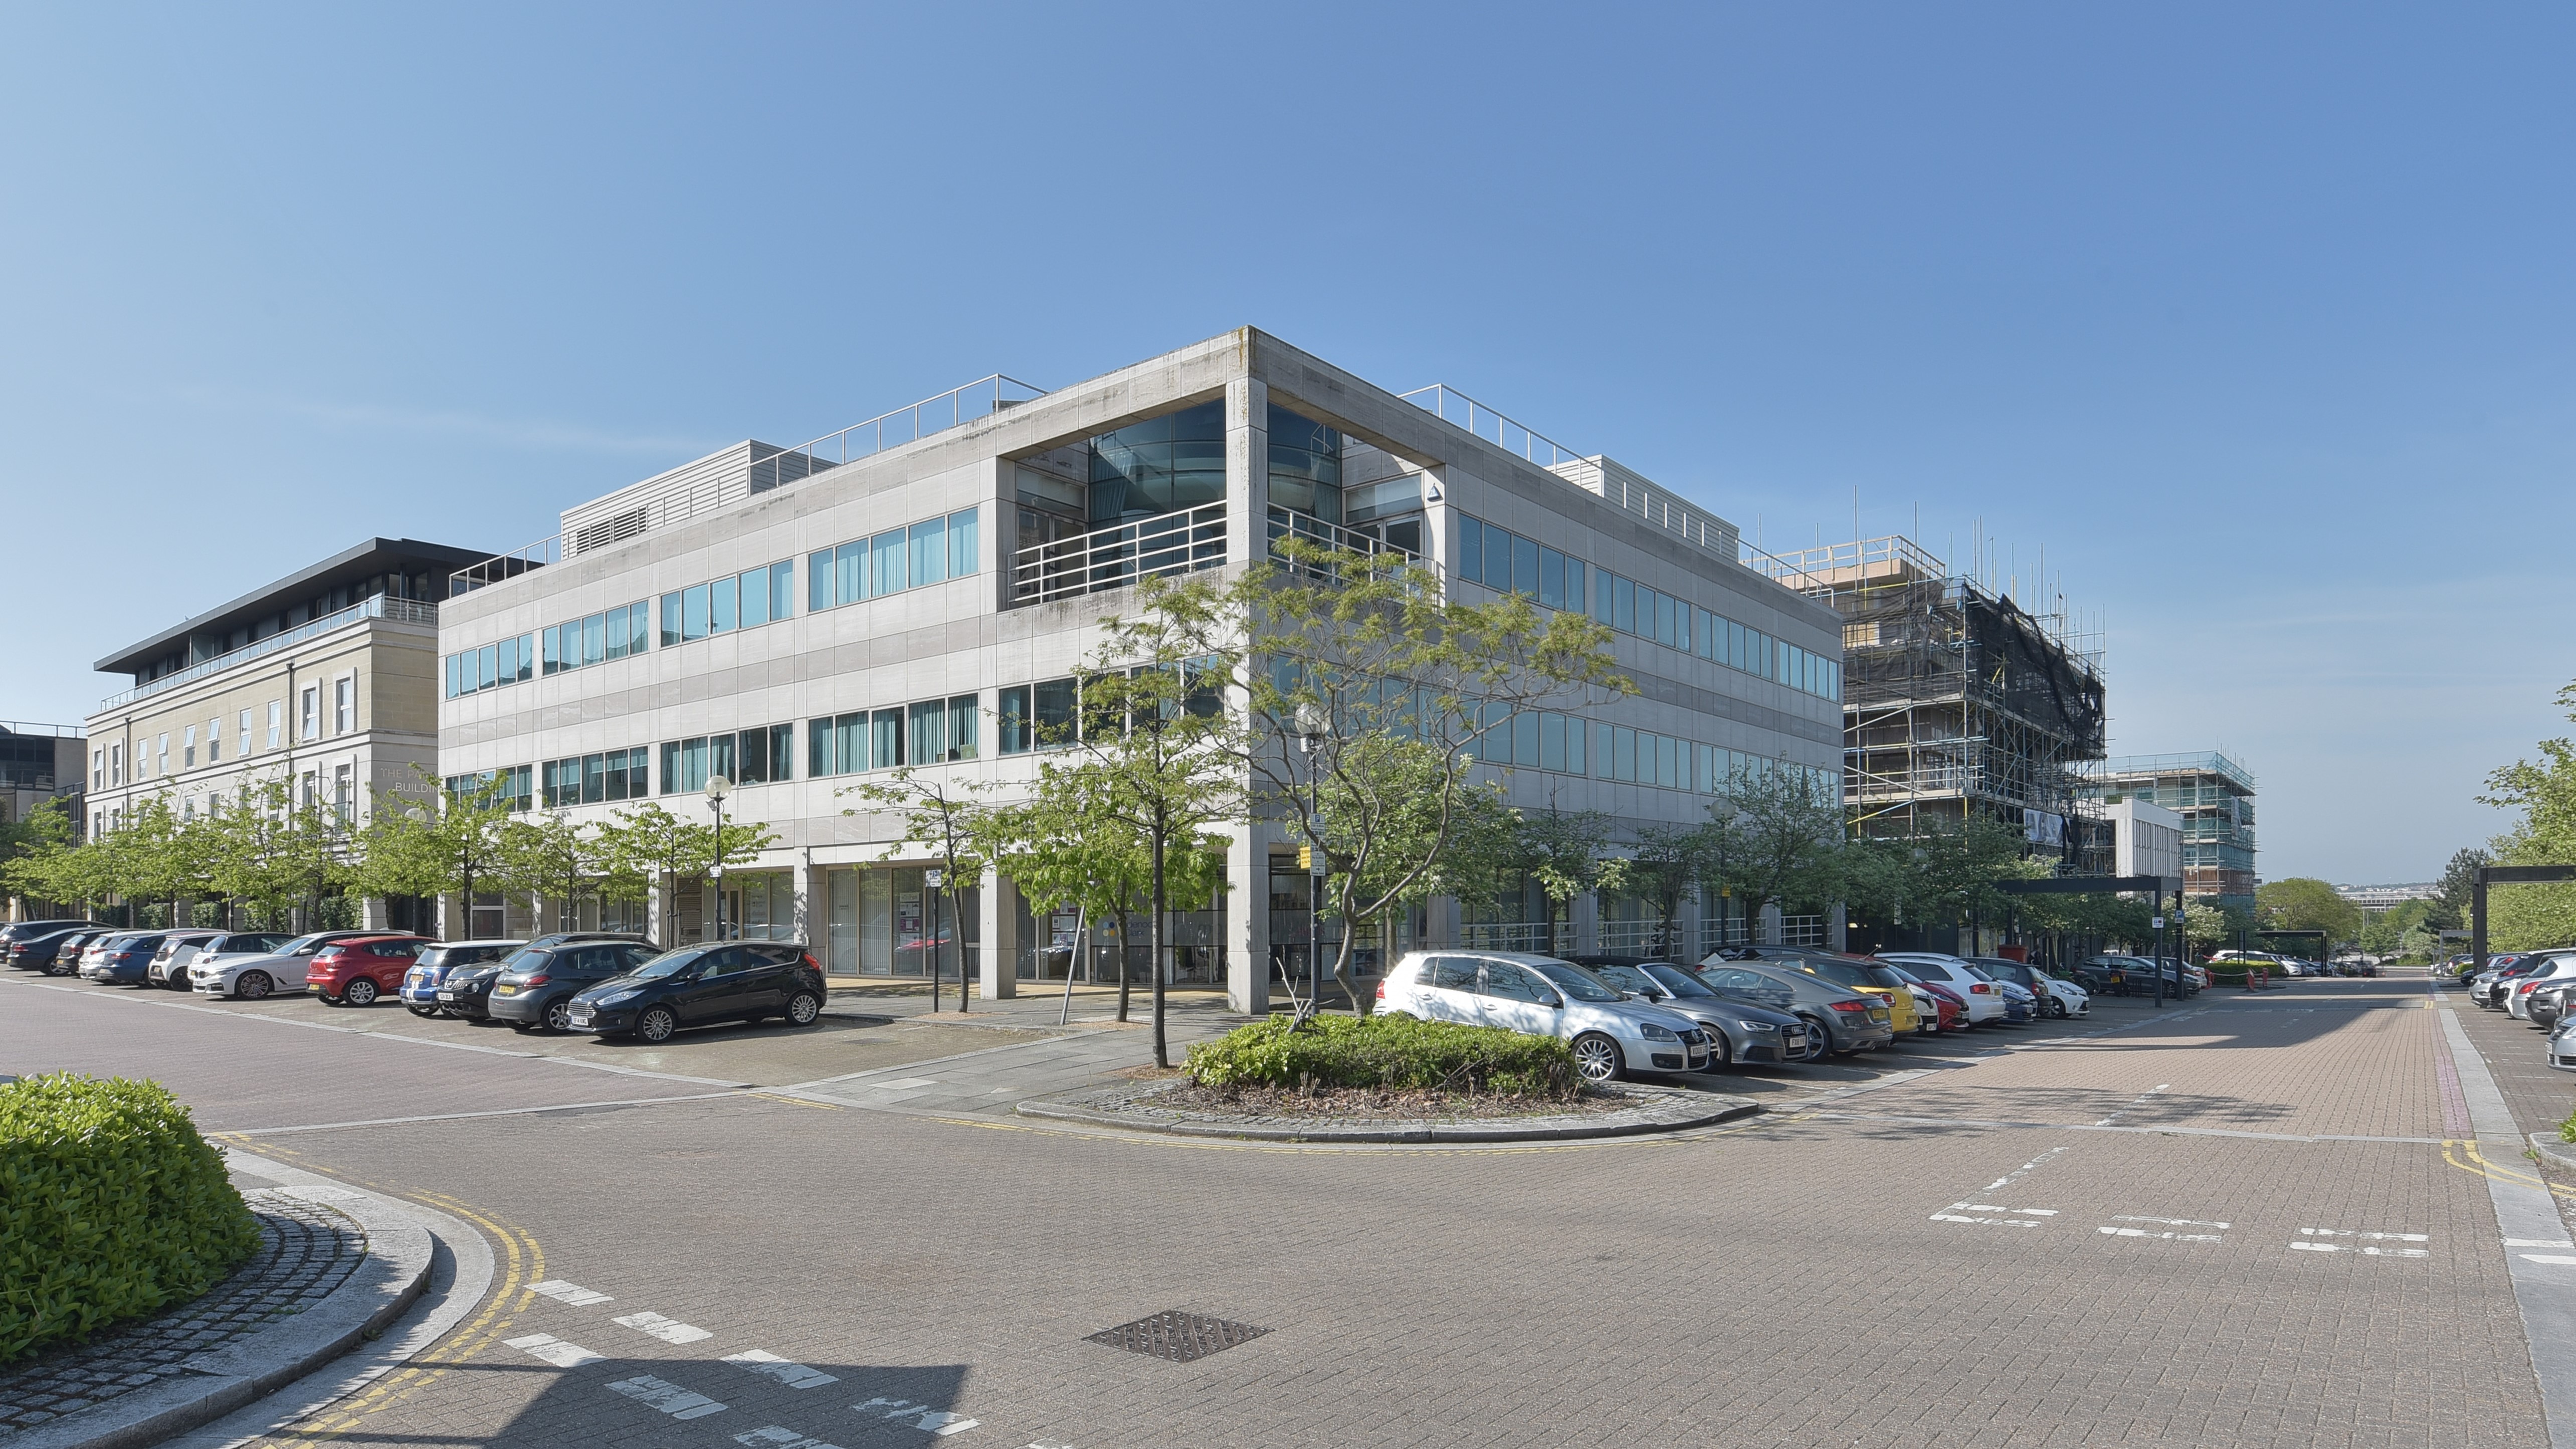 Acquisition of a single let office building in the central business district of Milton Keynes